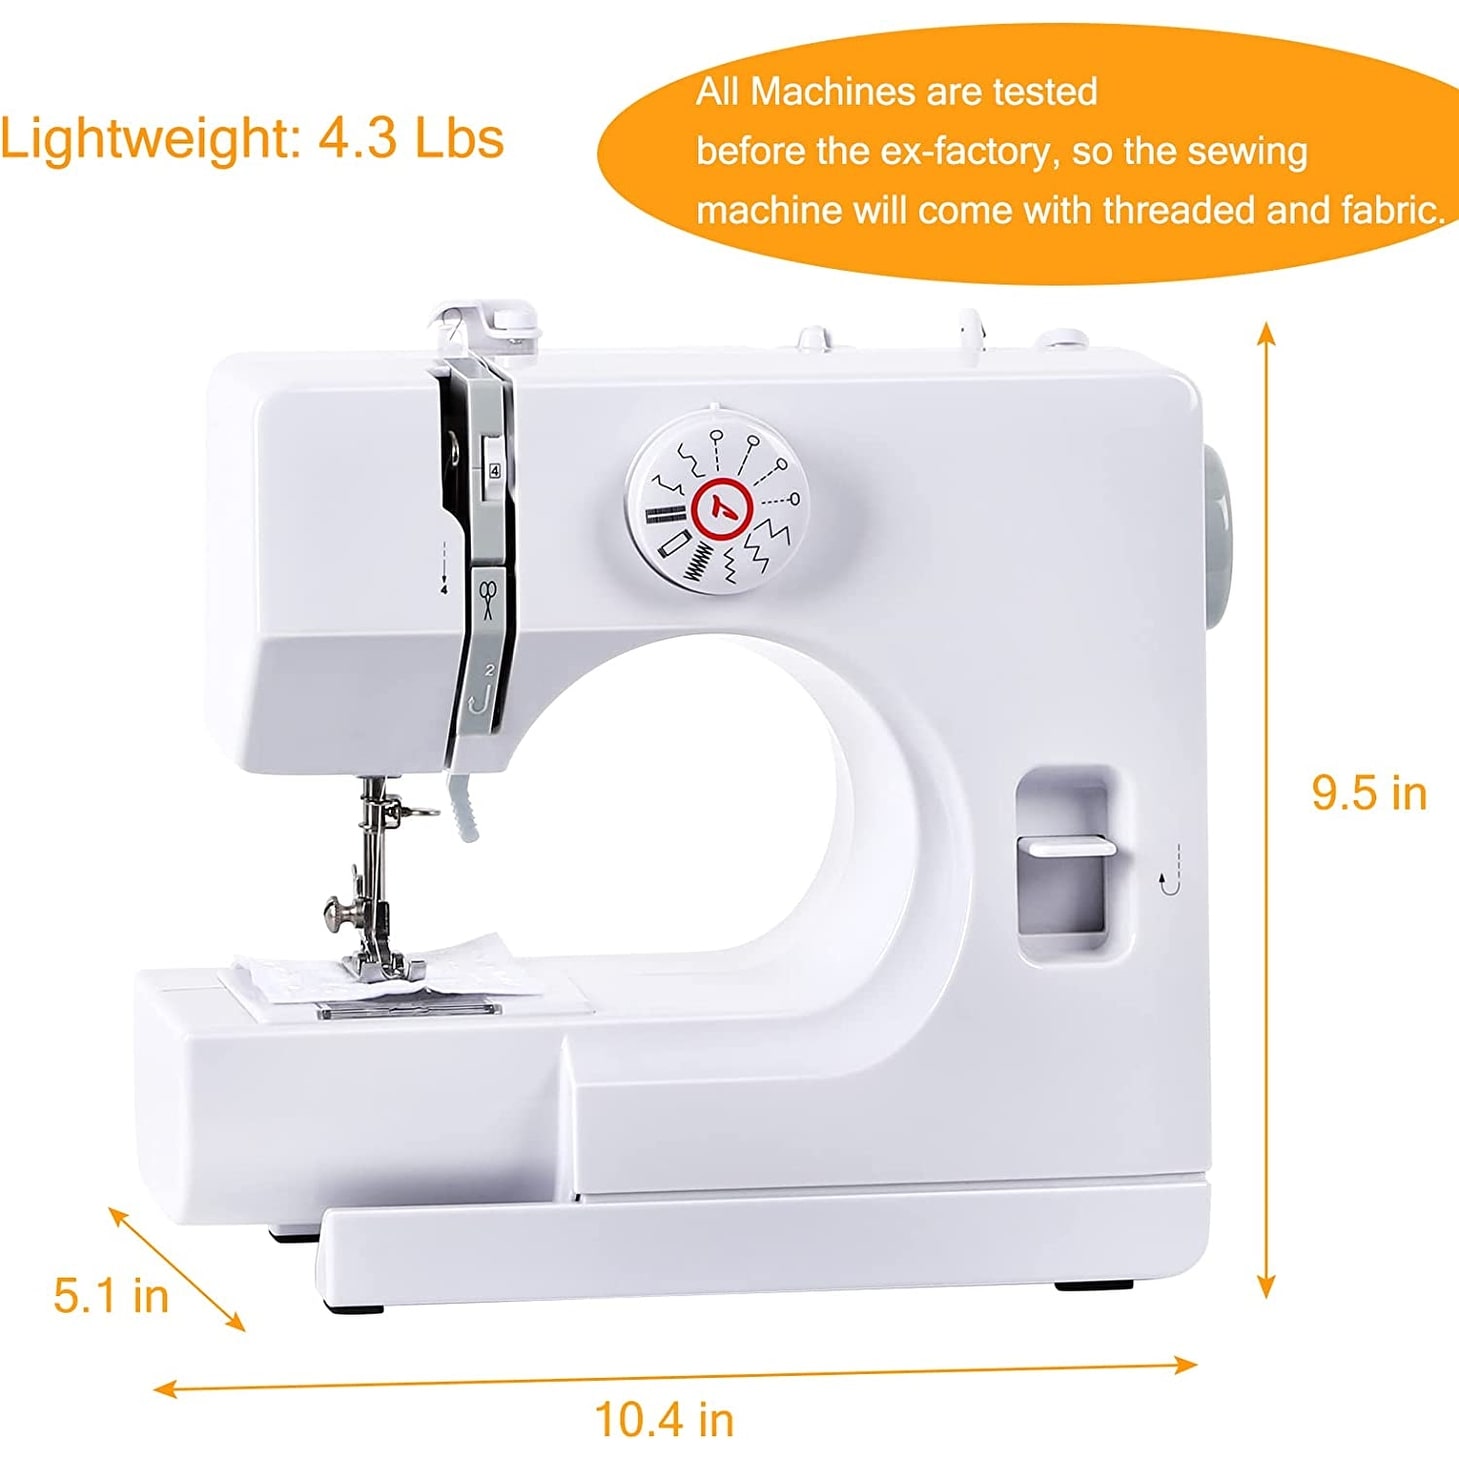 As Seen on TV Portable Hand Held Sewing Machine Quick Stitching